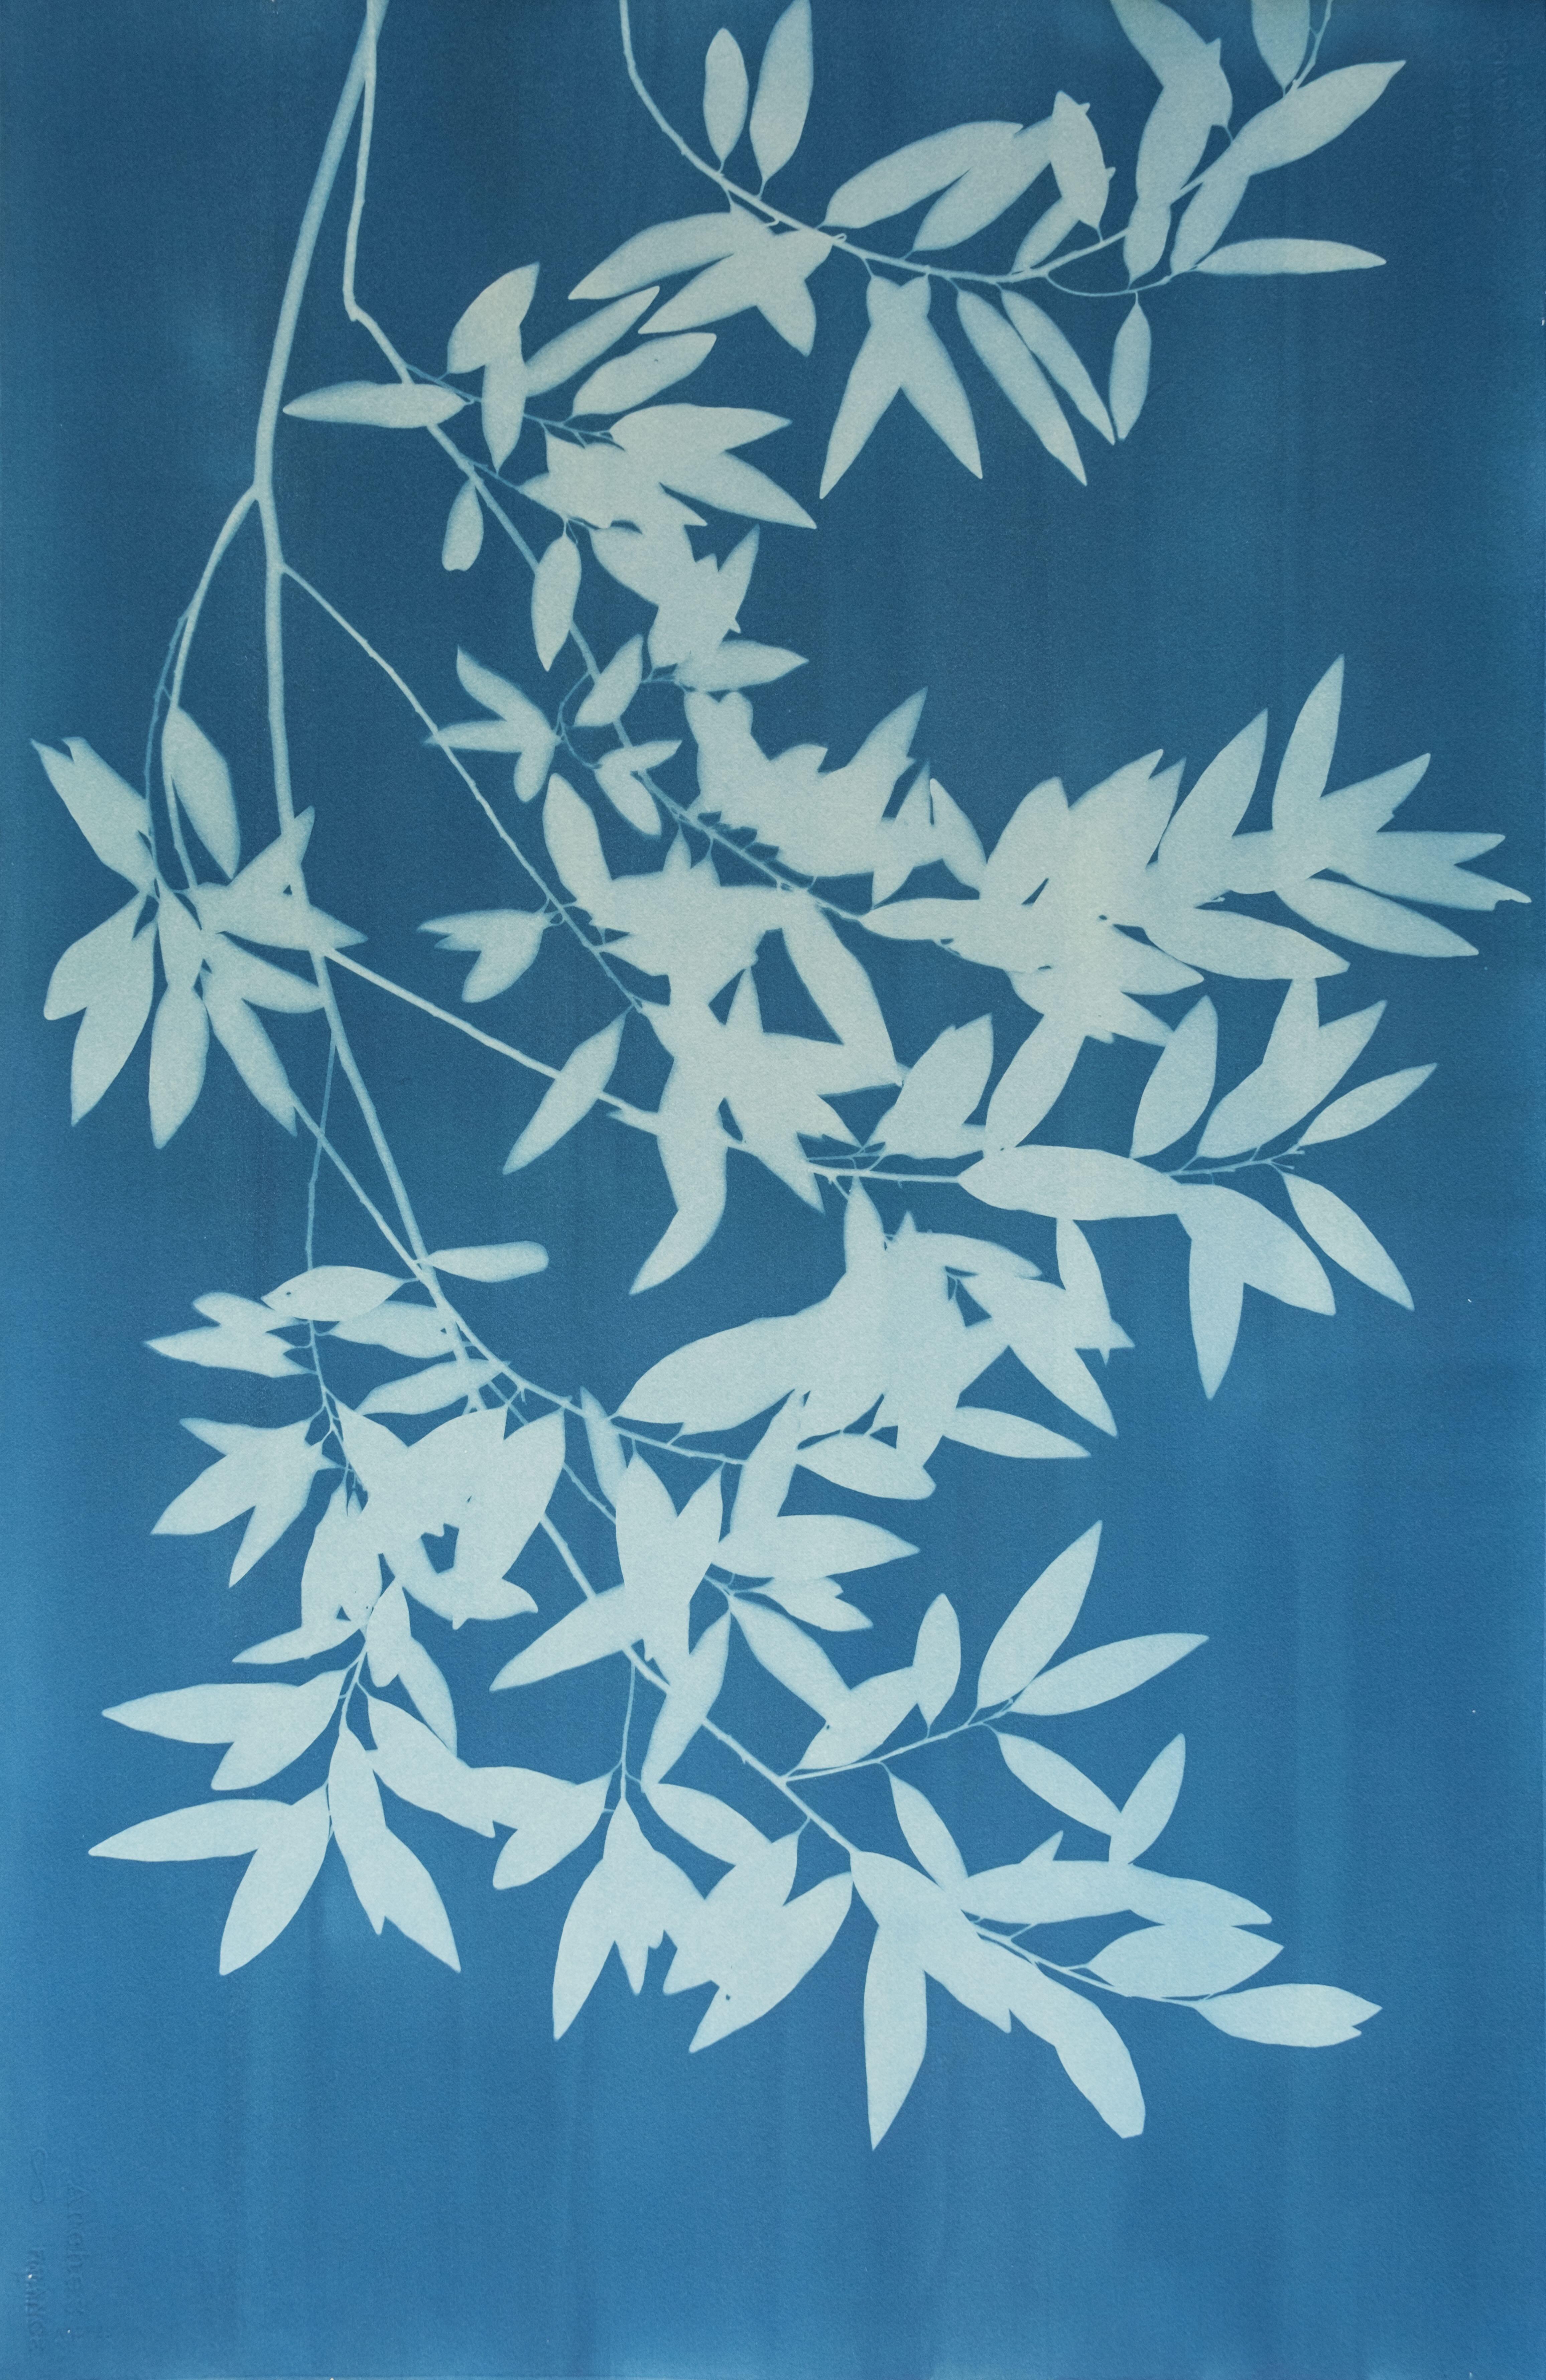 Bay Laurel Diptych (Hand-printed cyanotype, 40 x 52 inches combined) - Contemporary Print by Christine So